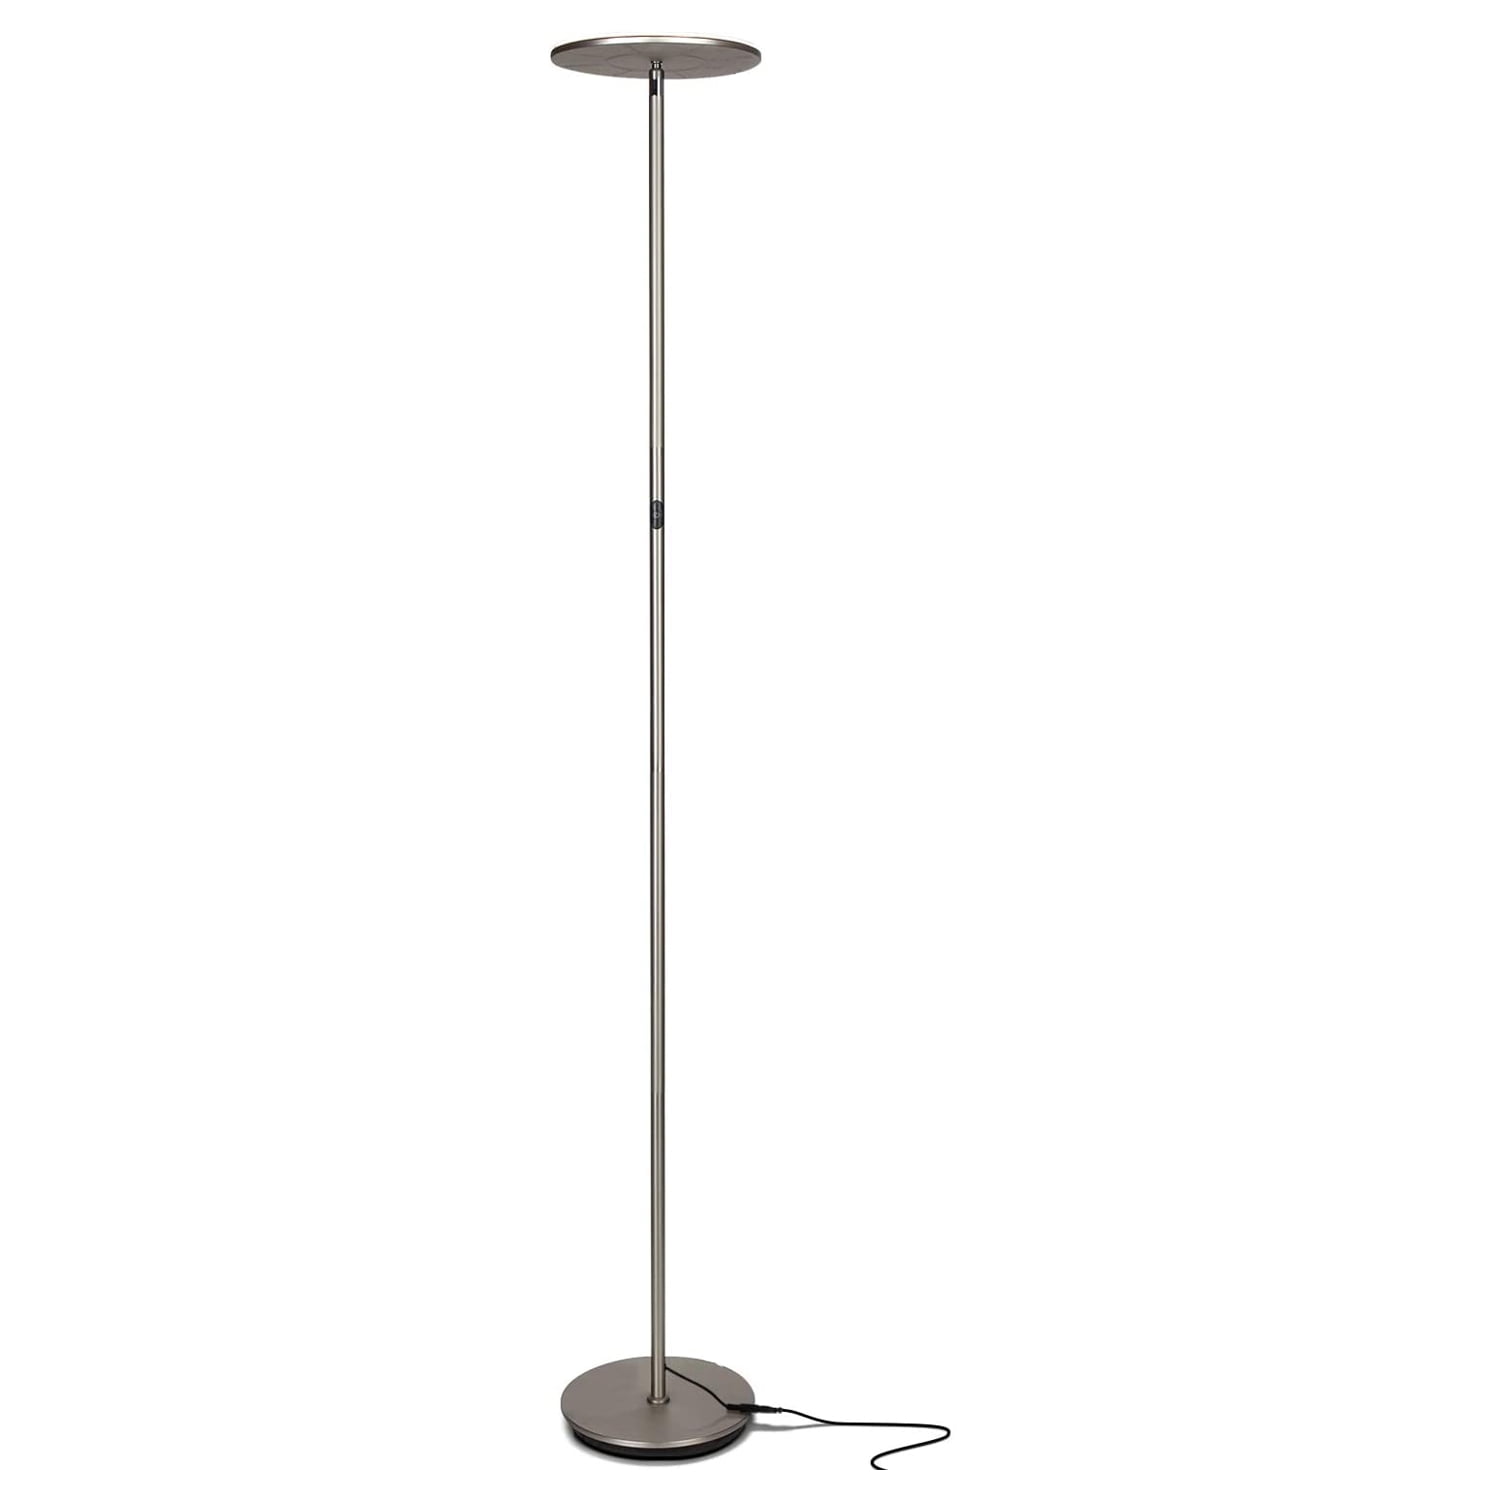 Tall Standing Modern Pole Light for Living Rooms & Offices Brightech Sky LED Torchiere Super Bright Floor Lamp Dimmable Uplight for Reading Books in Your Bedroom etc Dark Bronze 